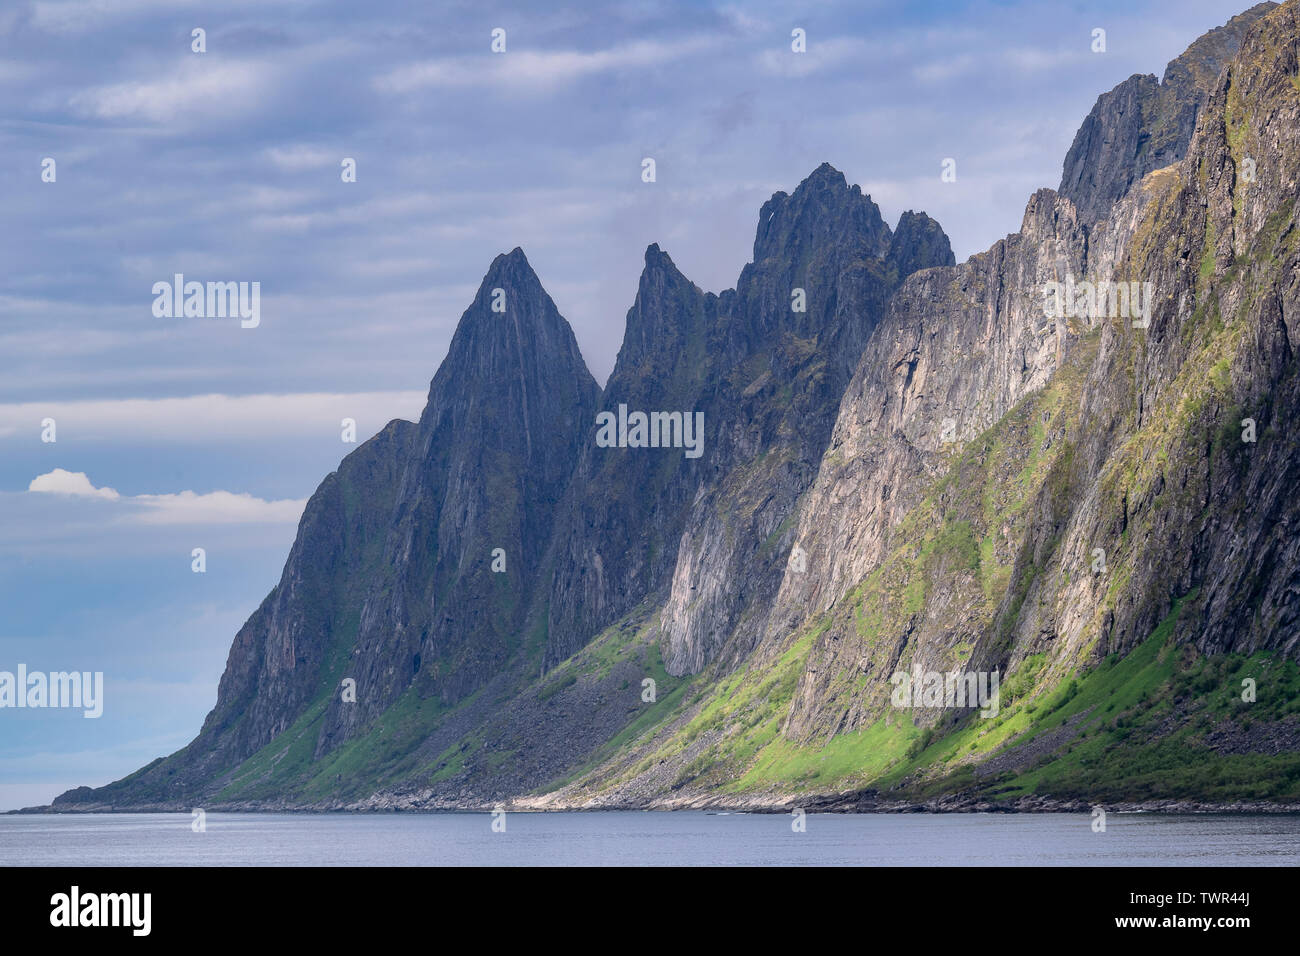 The Devils Jaw, or Tungeneset, is a stunning series of jagged mountain peaks and breathtaking views on the northern Norwegian island of Senja. Stock Photo